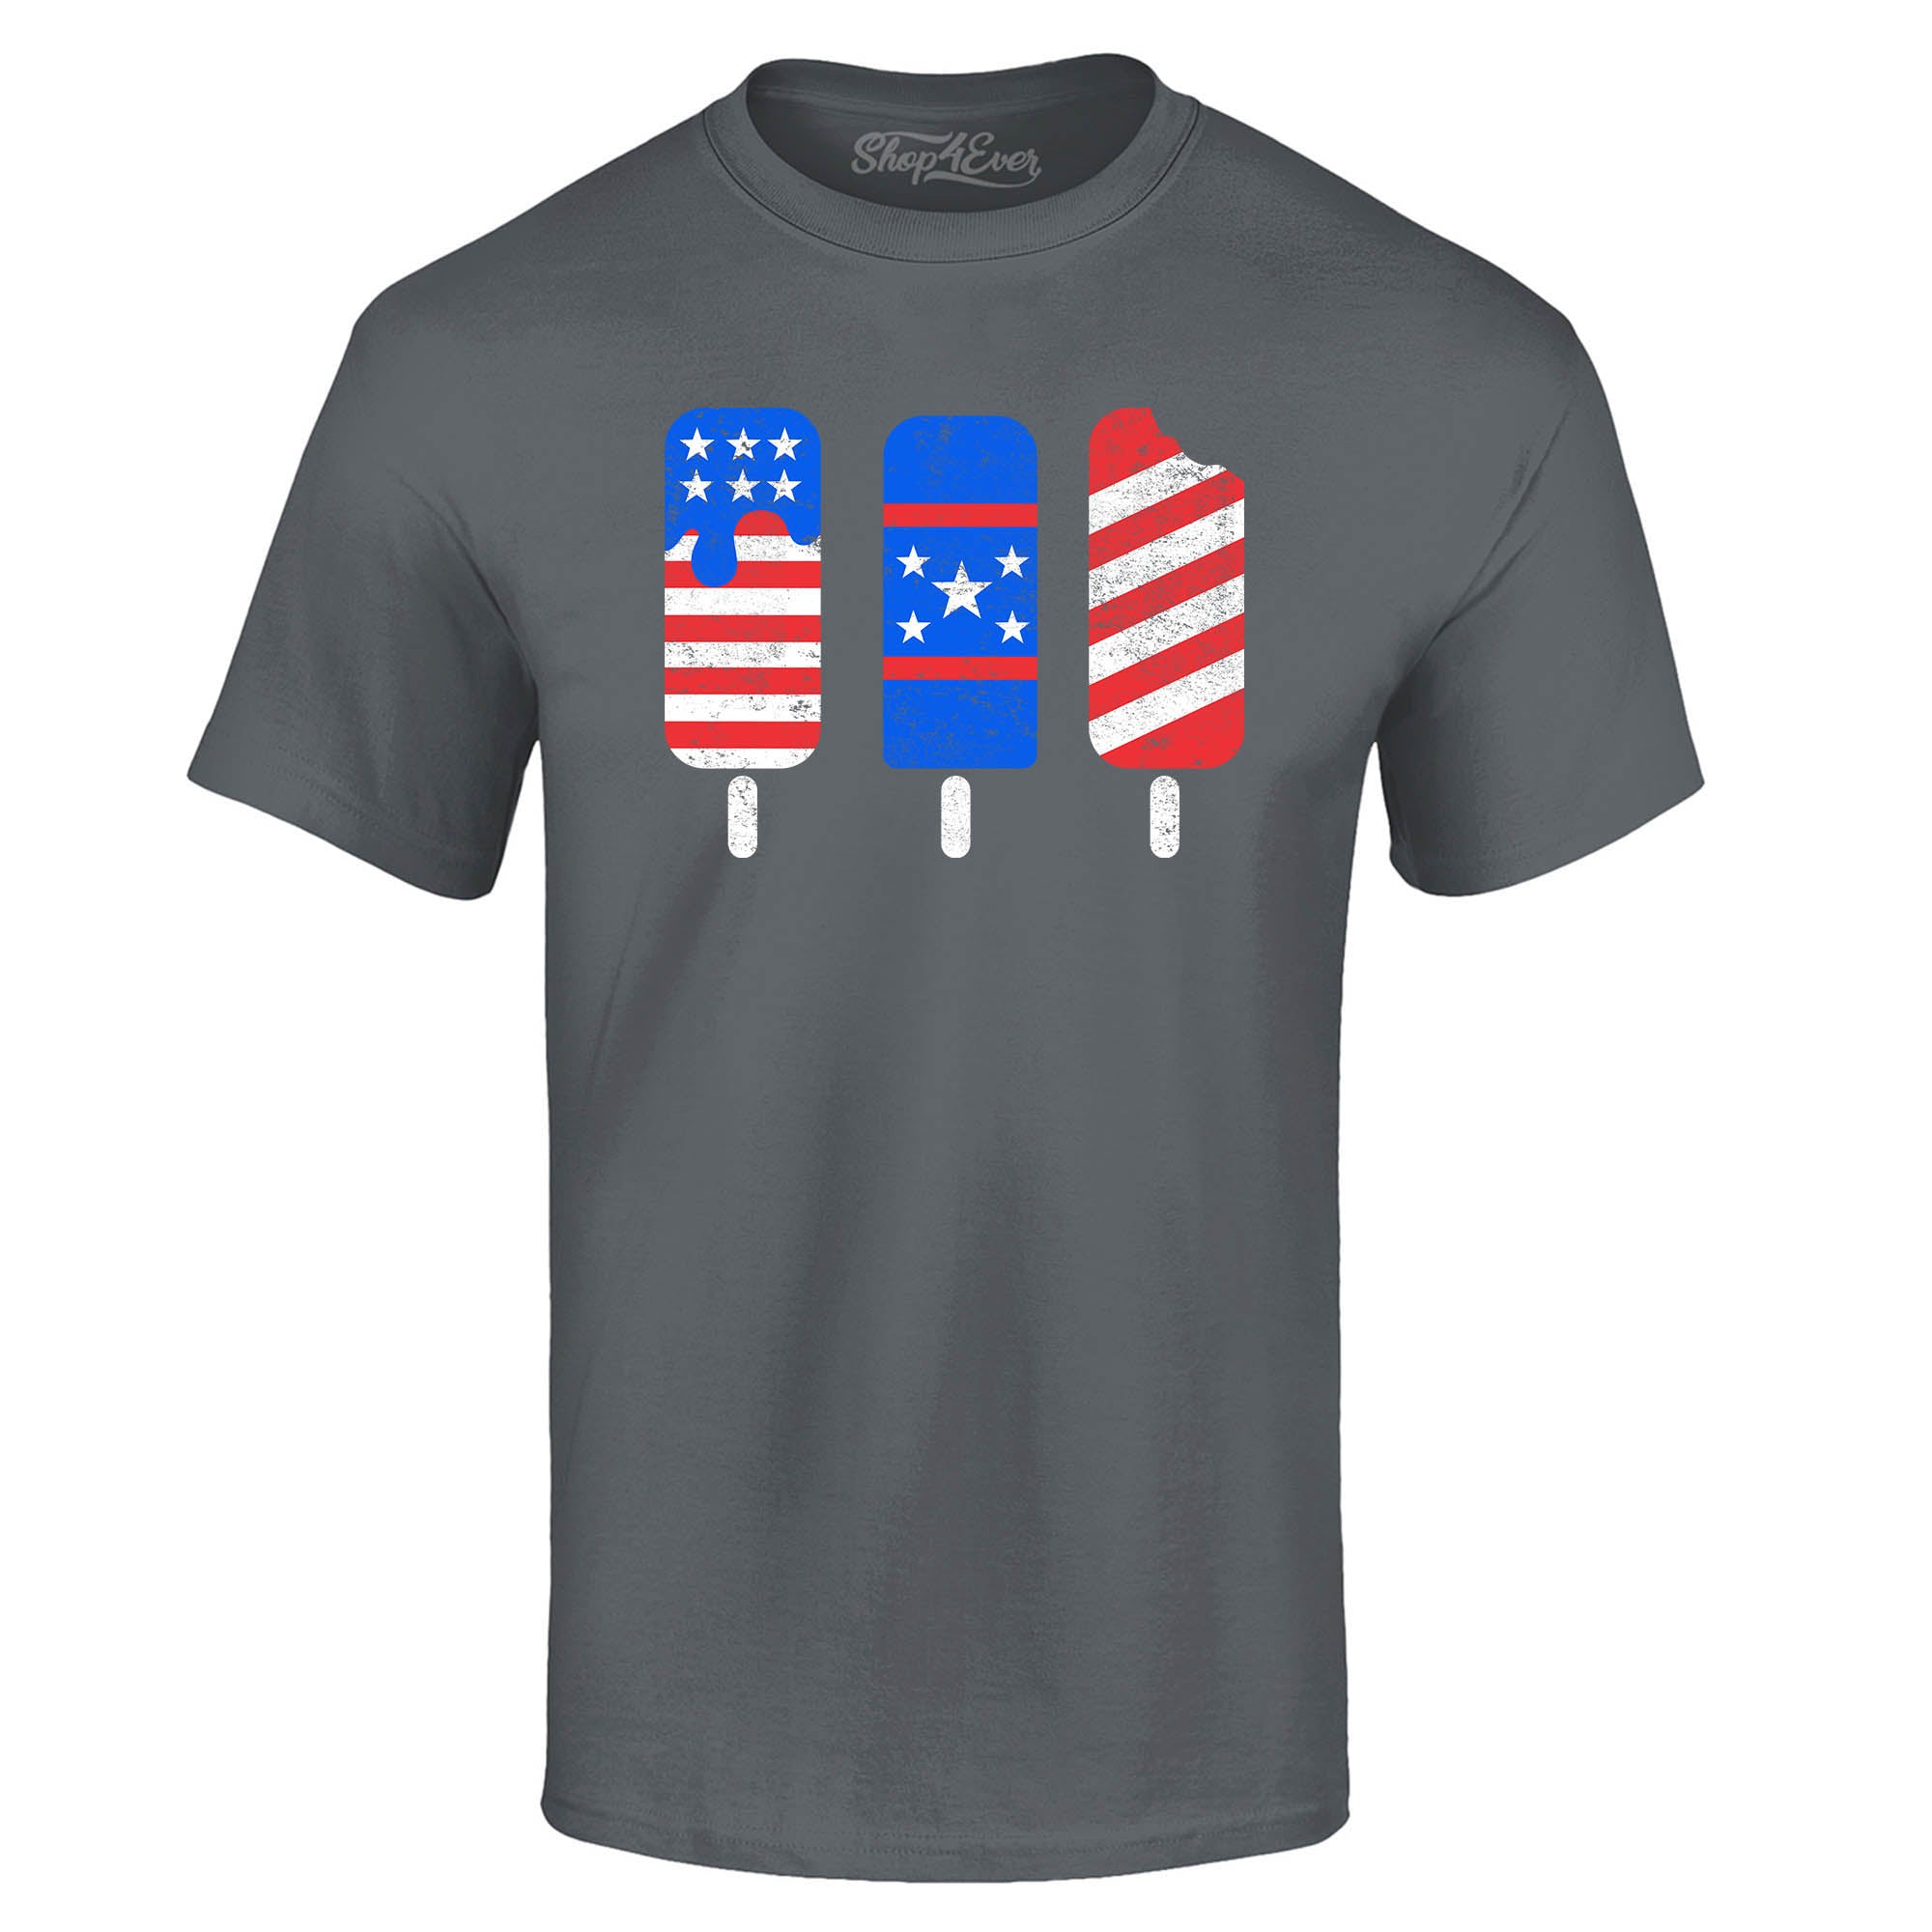 Patriotic Popsicles Ice Cream 4th of July T-Shirt